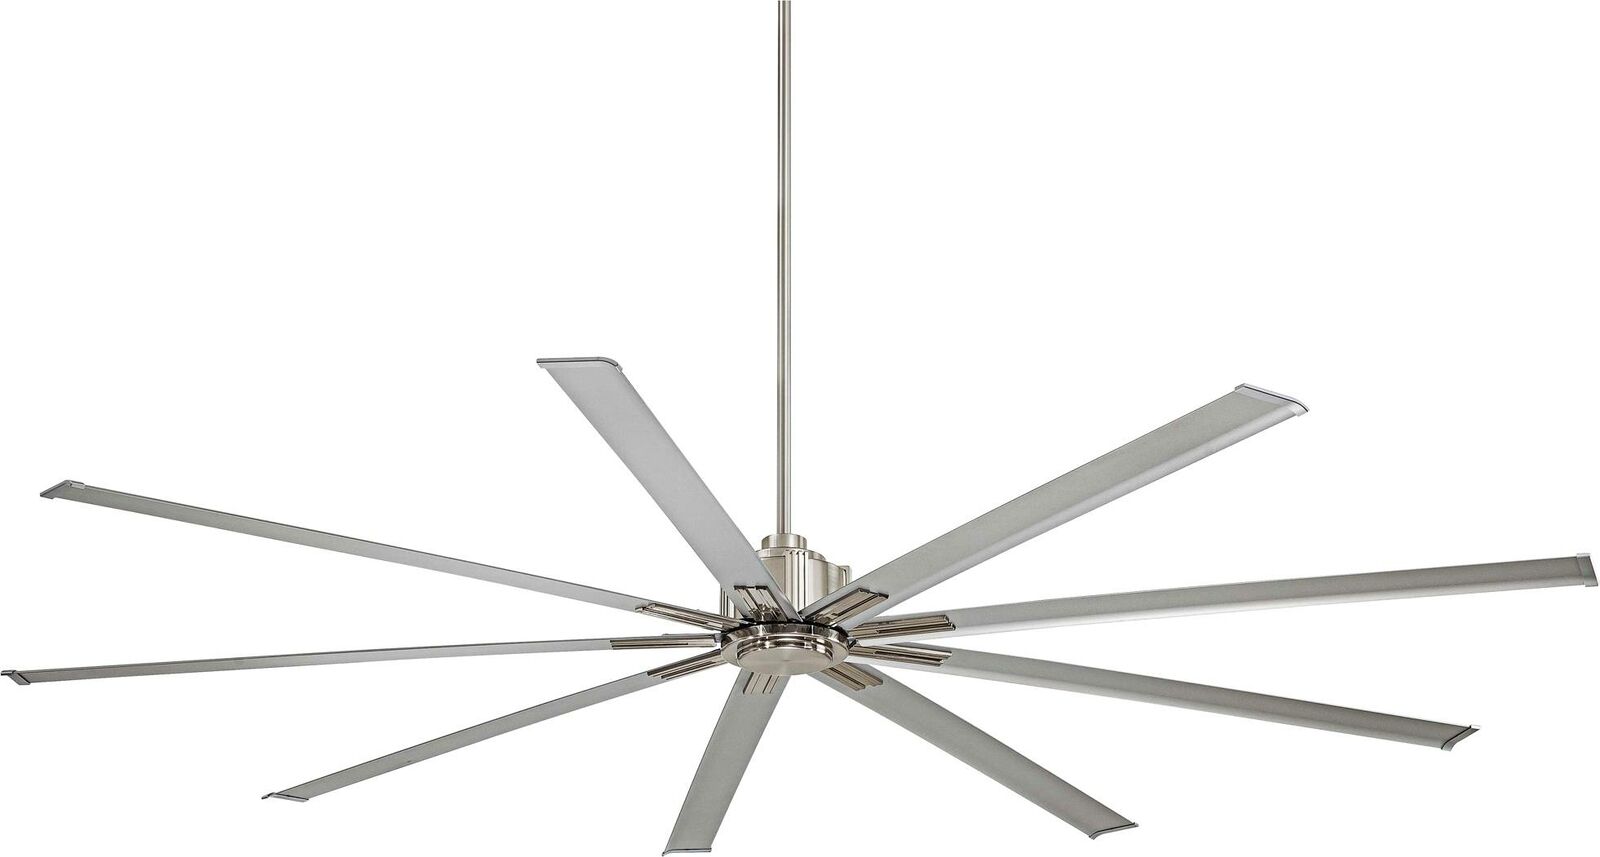 72" Minka Aire Xtreme Brushed Nickel Ceiling Fan